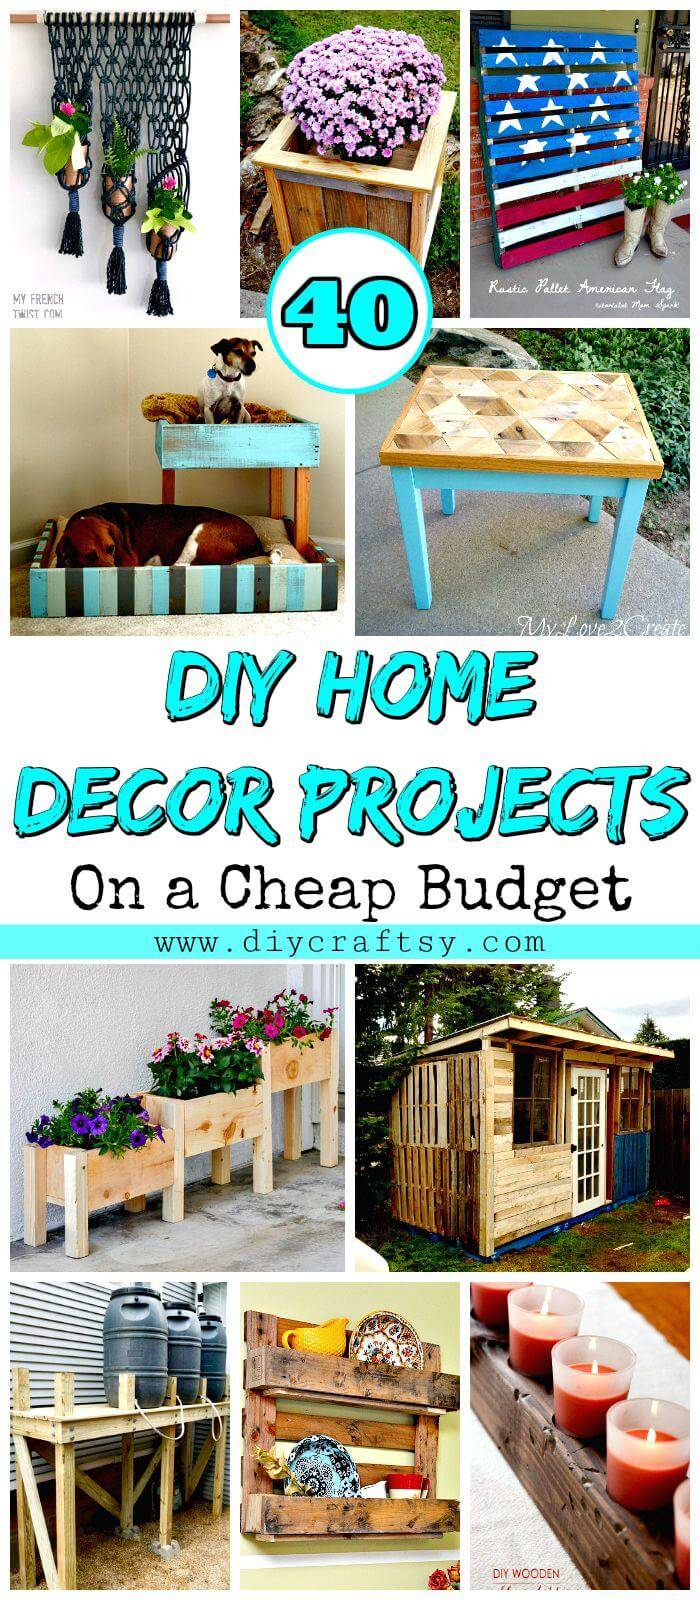 40 DIY Home Decor Projects on a Cheap Budget ⋆ DIY Crafts